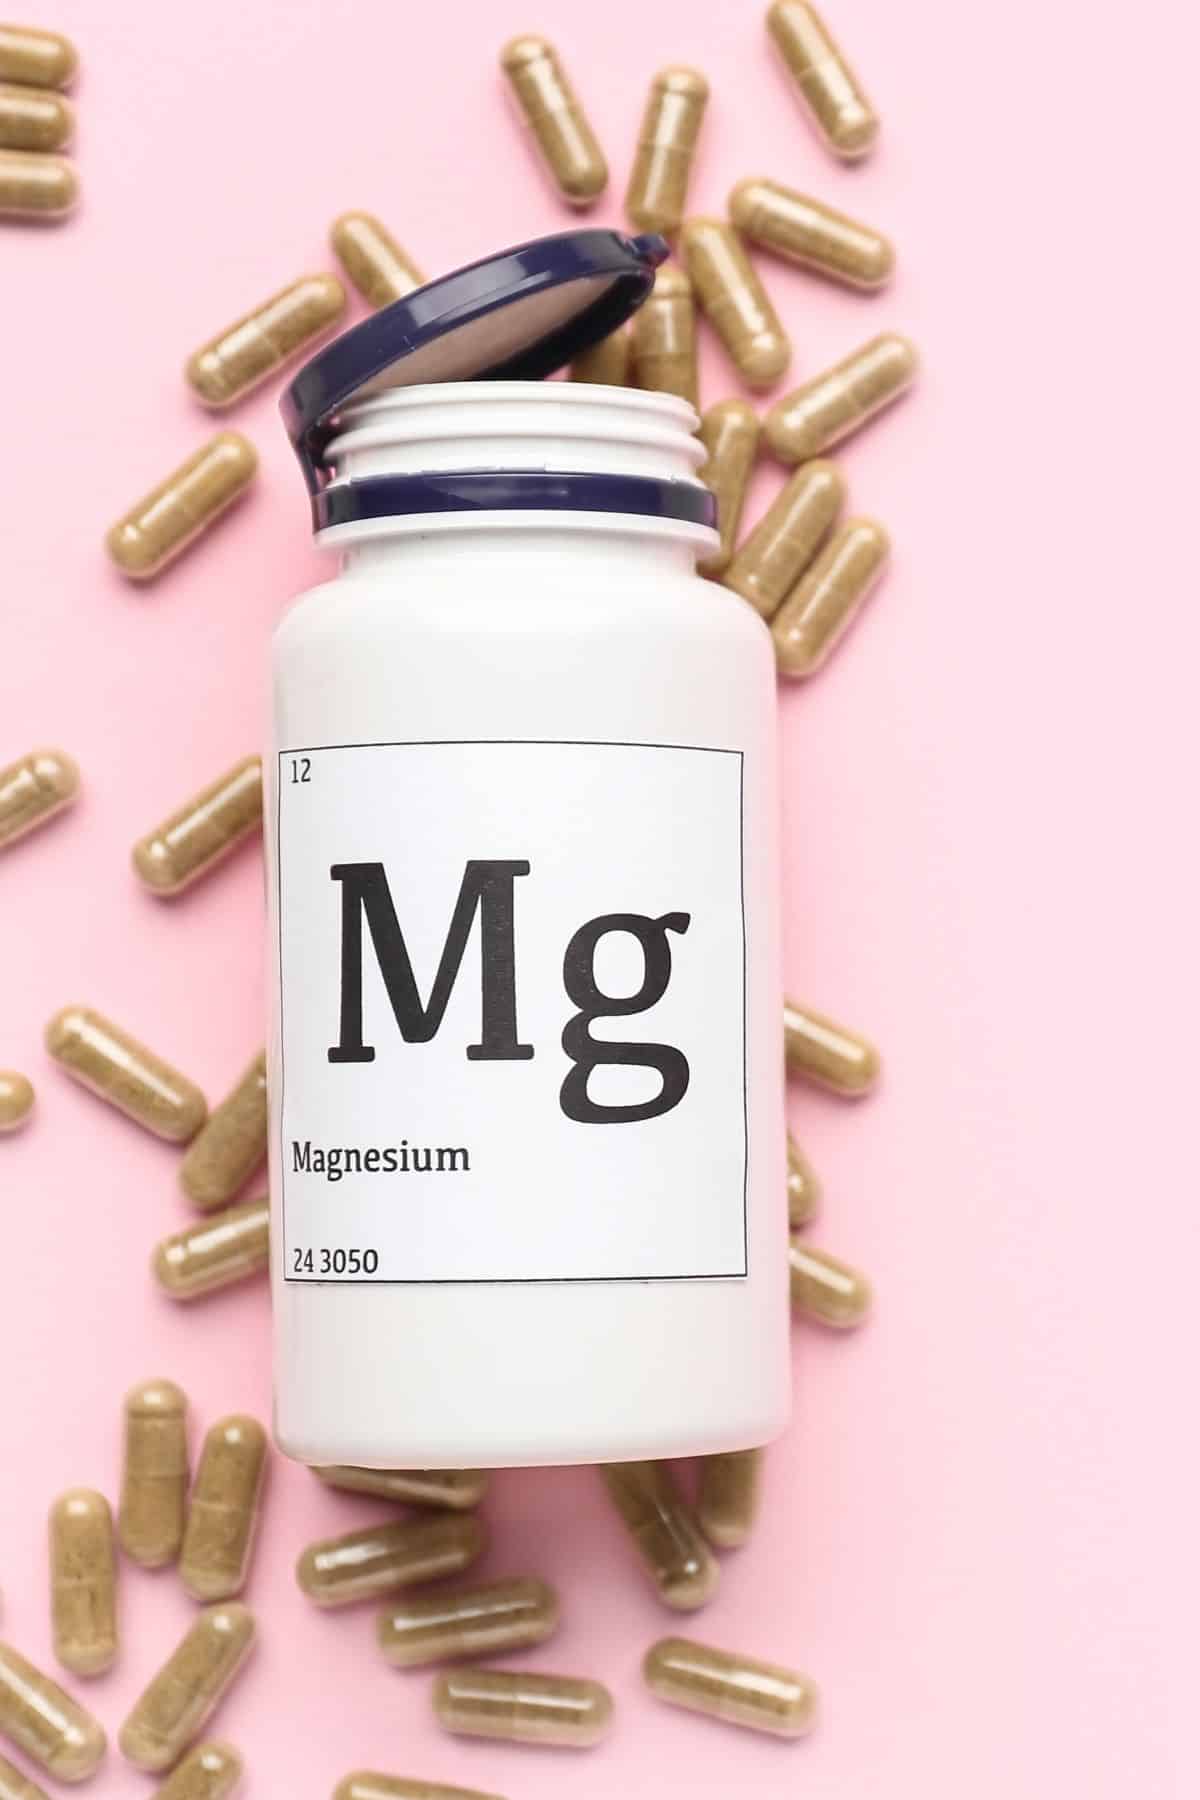 a bottle labled "Mg" surrounded by tablets of magnesium.